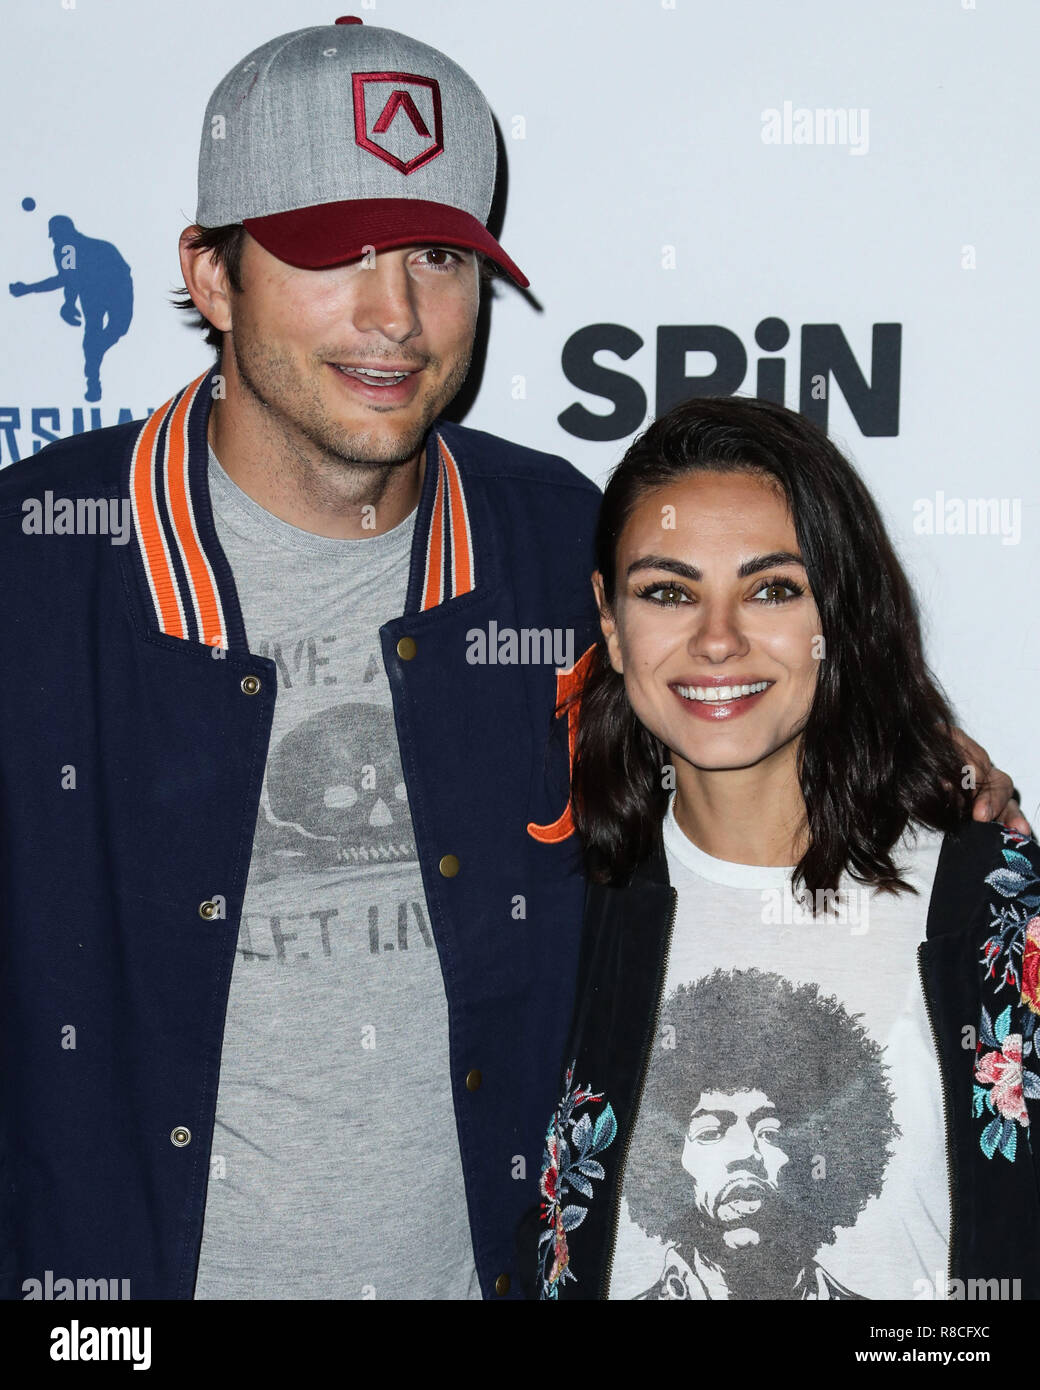 LOS ANGELES, CA, USA - AUGUST 23: Ashton Kutcher, Mila Kunis at the 6th Annual PingPong4Purpose held at Dodger Stadium on August 23, 2018 in Los Angeles, California, United States. (Photo by Xavier Collin/Image Press Agency) Stock Photo